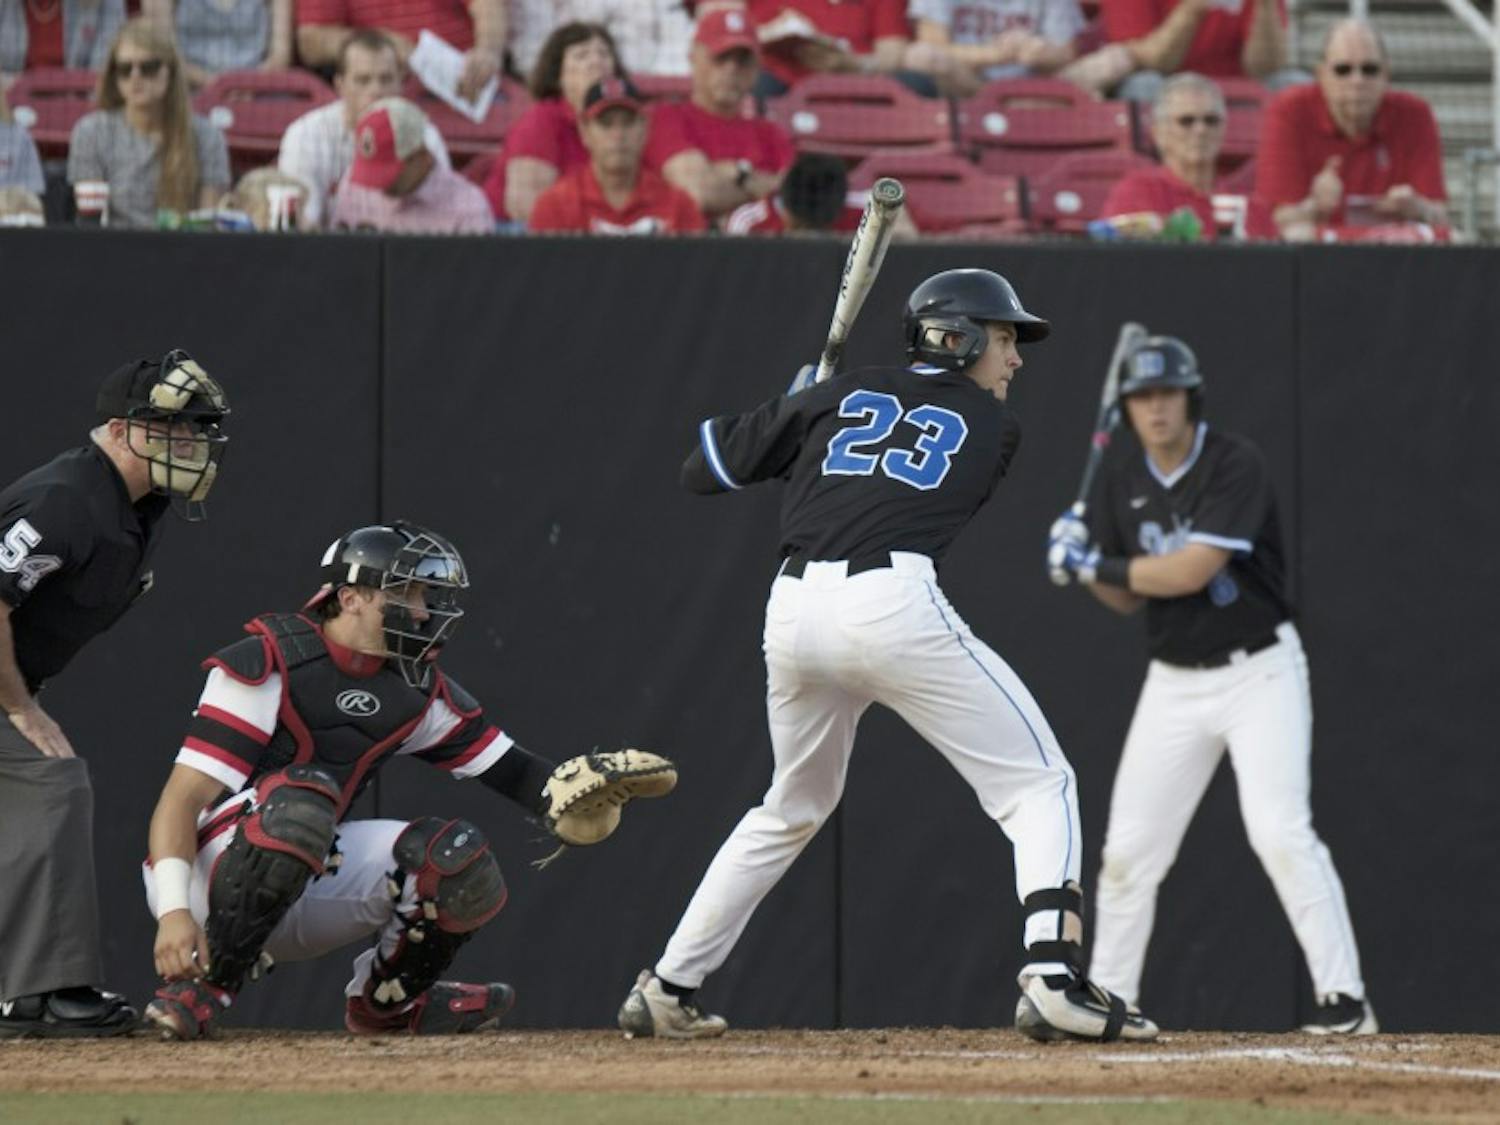 Chris Proctor scored one of Duke's two first-inning runs Friday night, but the Blue Devils were unable to generate any offense after that, going 1-for-9 with runners in scoring position.&nbsp;